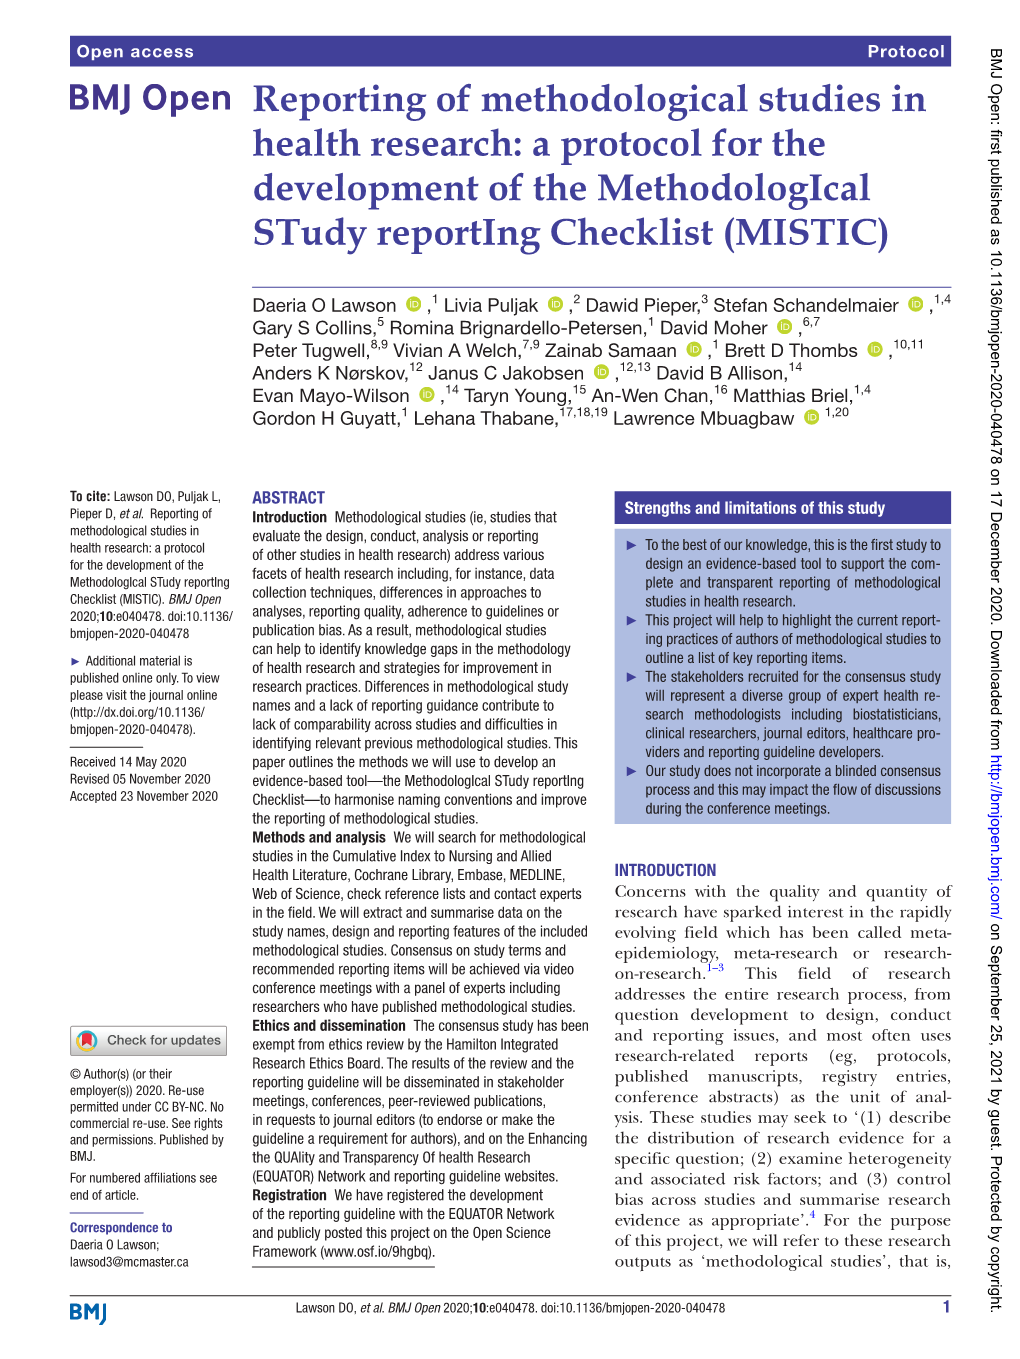 Reporting of Methodological Studies in Health Research: a Protocol for the Development of the Methodological Study Reporting Checklist (MISTIC)